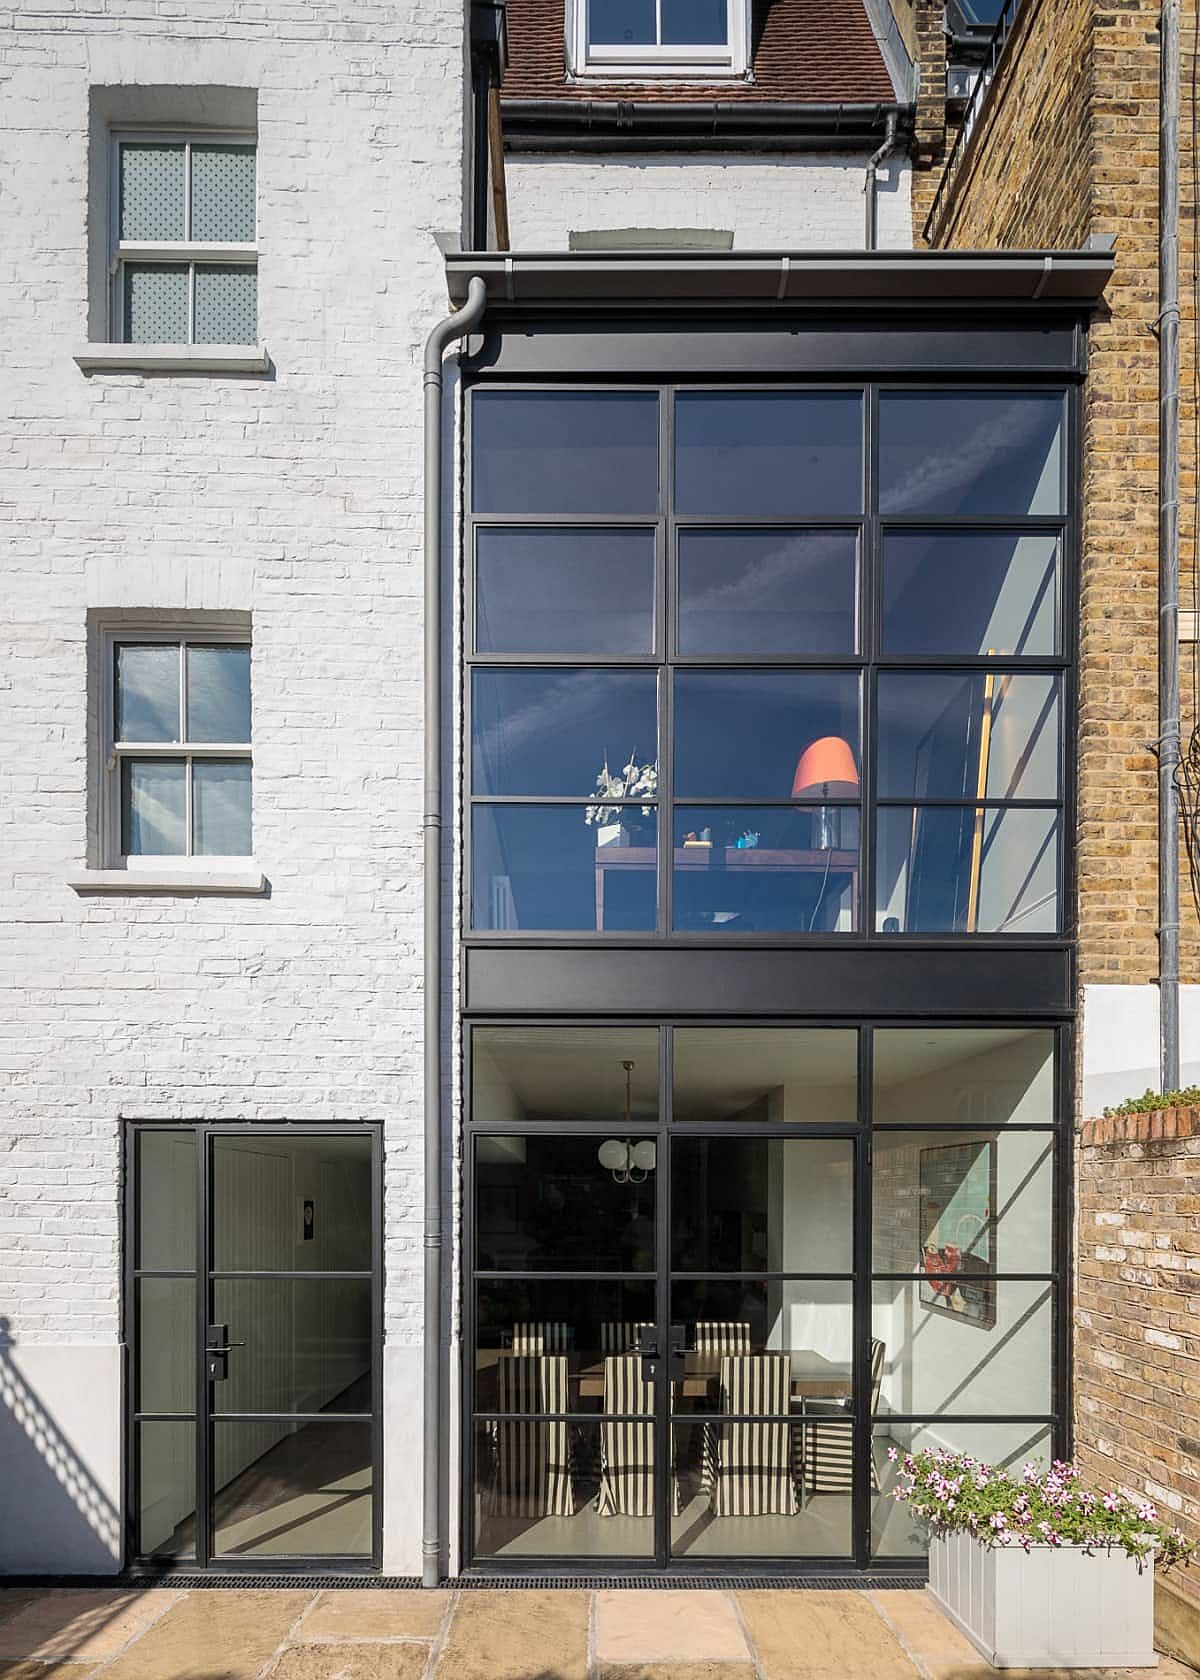 Combining the classic brick walls of traditional British homes with glass windows